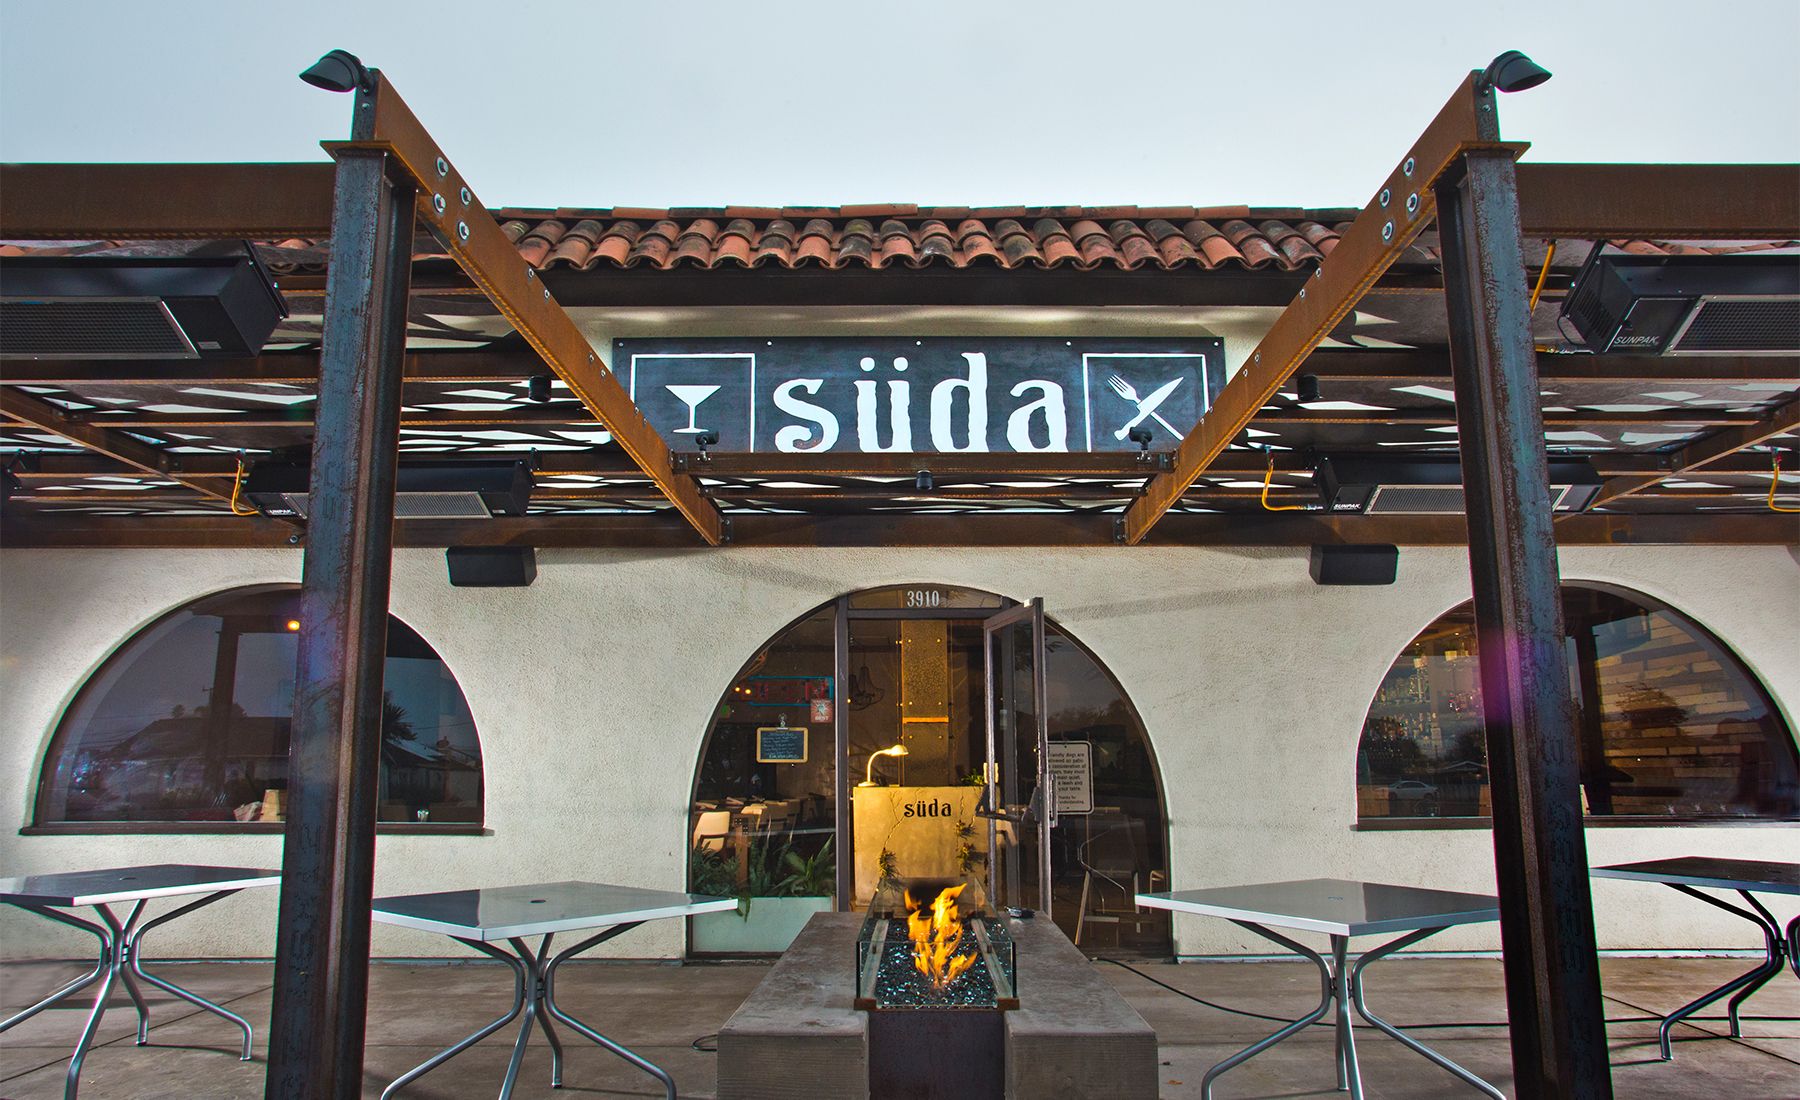 Cheney Metals fabricated the exterior architectural steel elements for the Suda Restaurant entrance